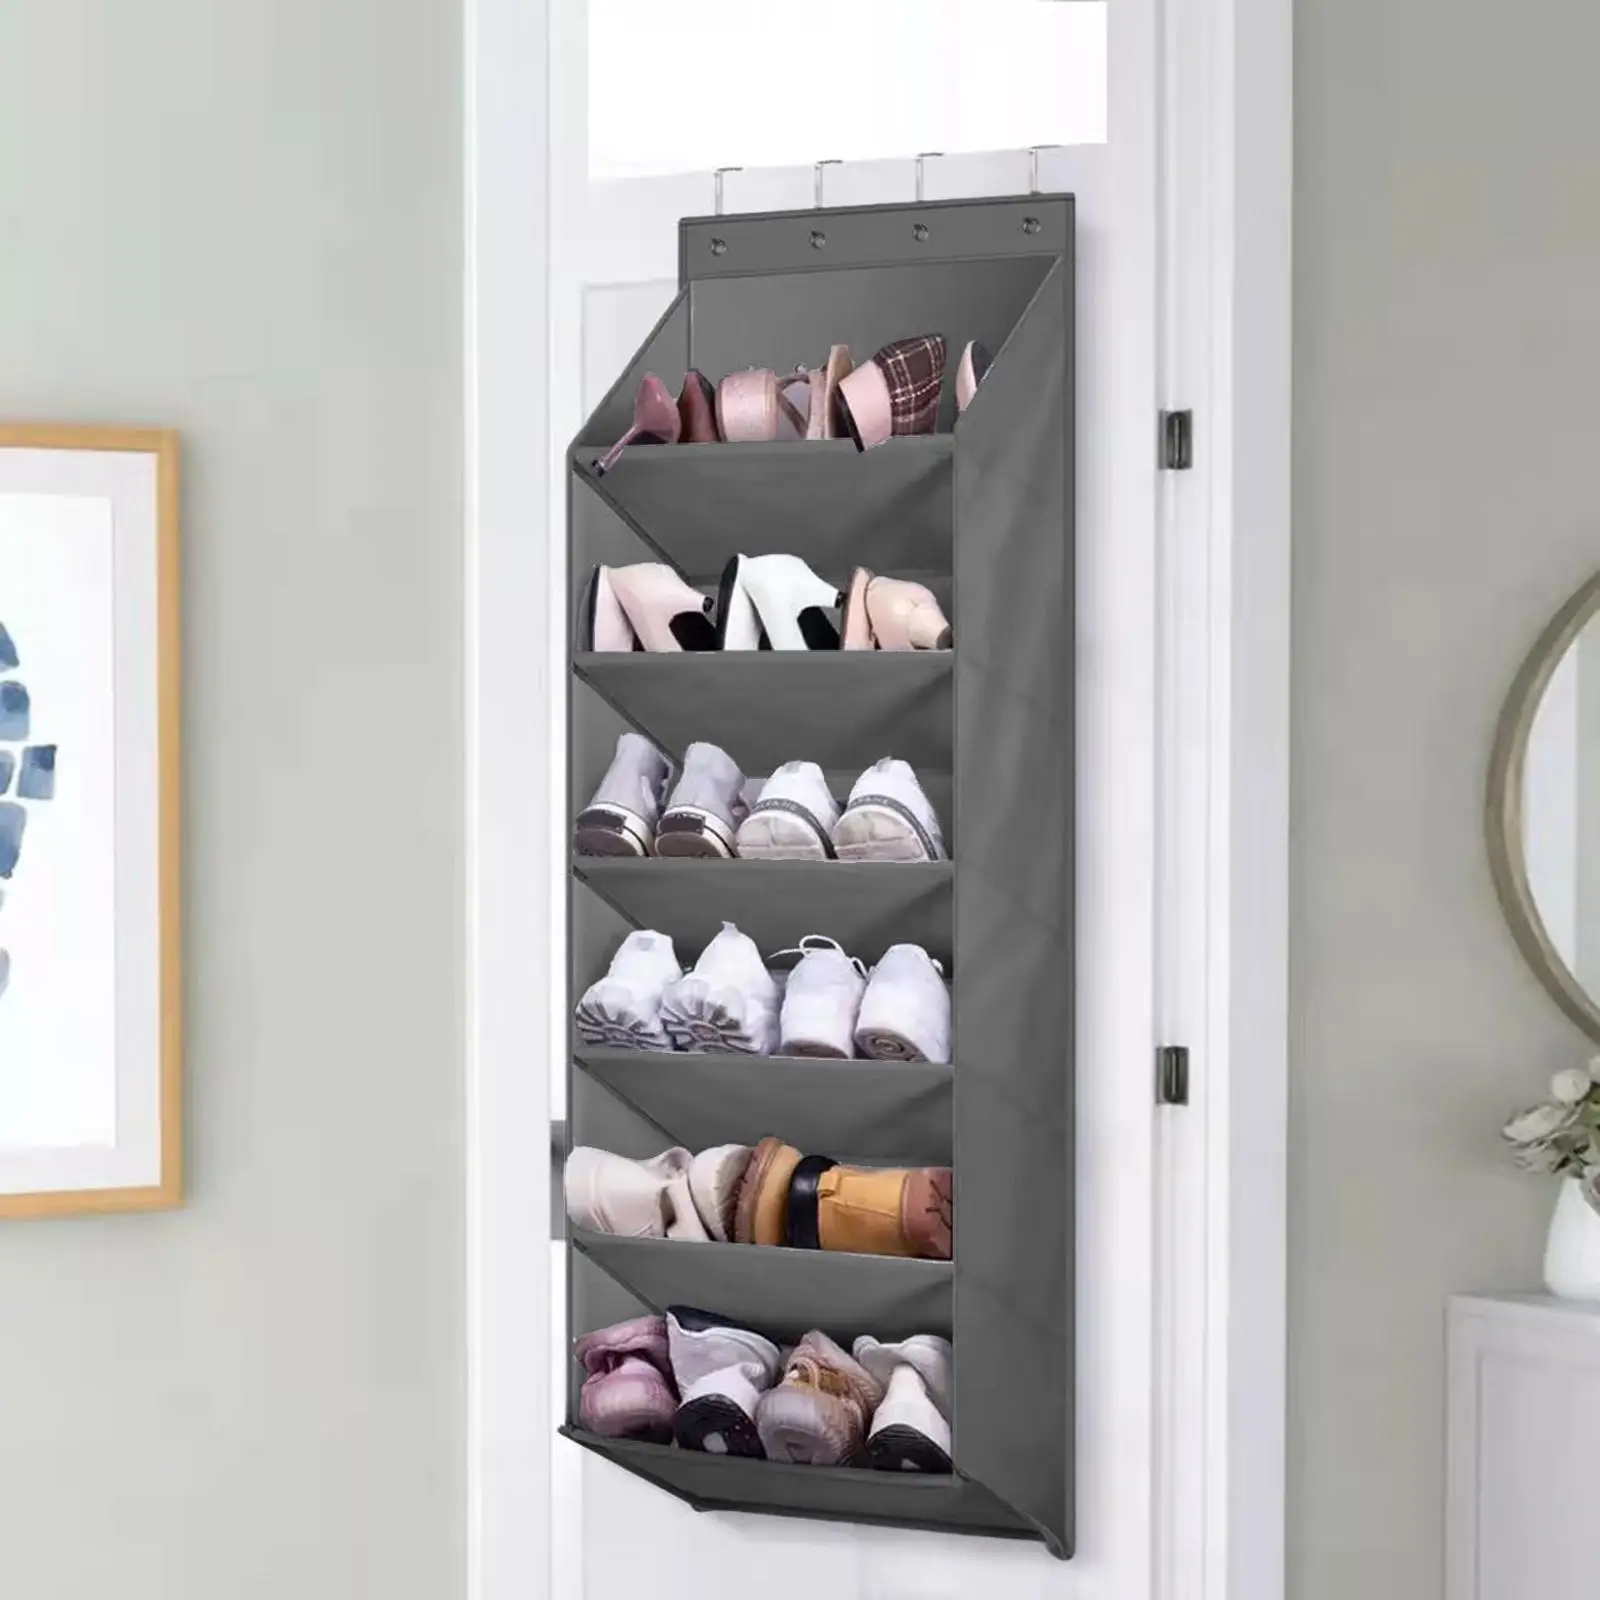 Deep Pockets Door Shoe Rack suits Kids Adults Oxford Cloth Hanging Storage Bag for Clothing Towels Baby Items 16 Pair Shoes